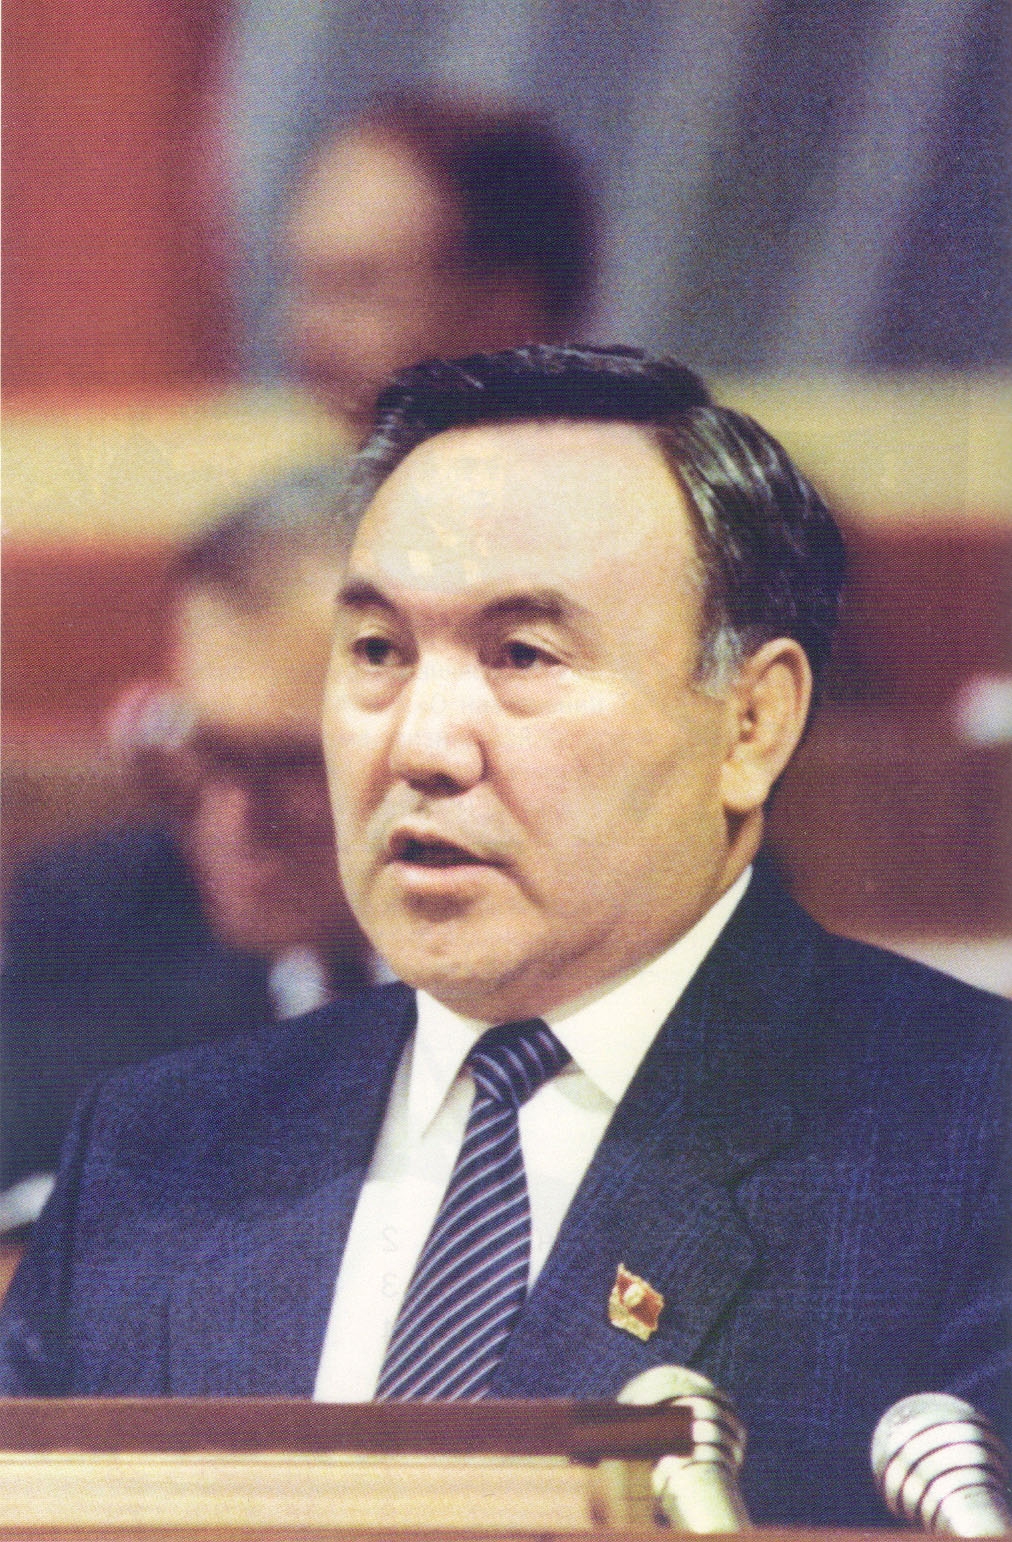 1991 - the first Law of the Republic of Kazakhstan "About the budgetary system"